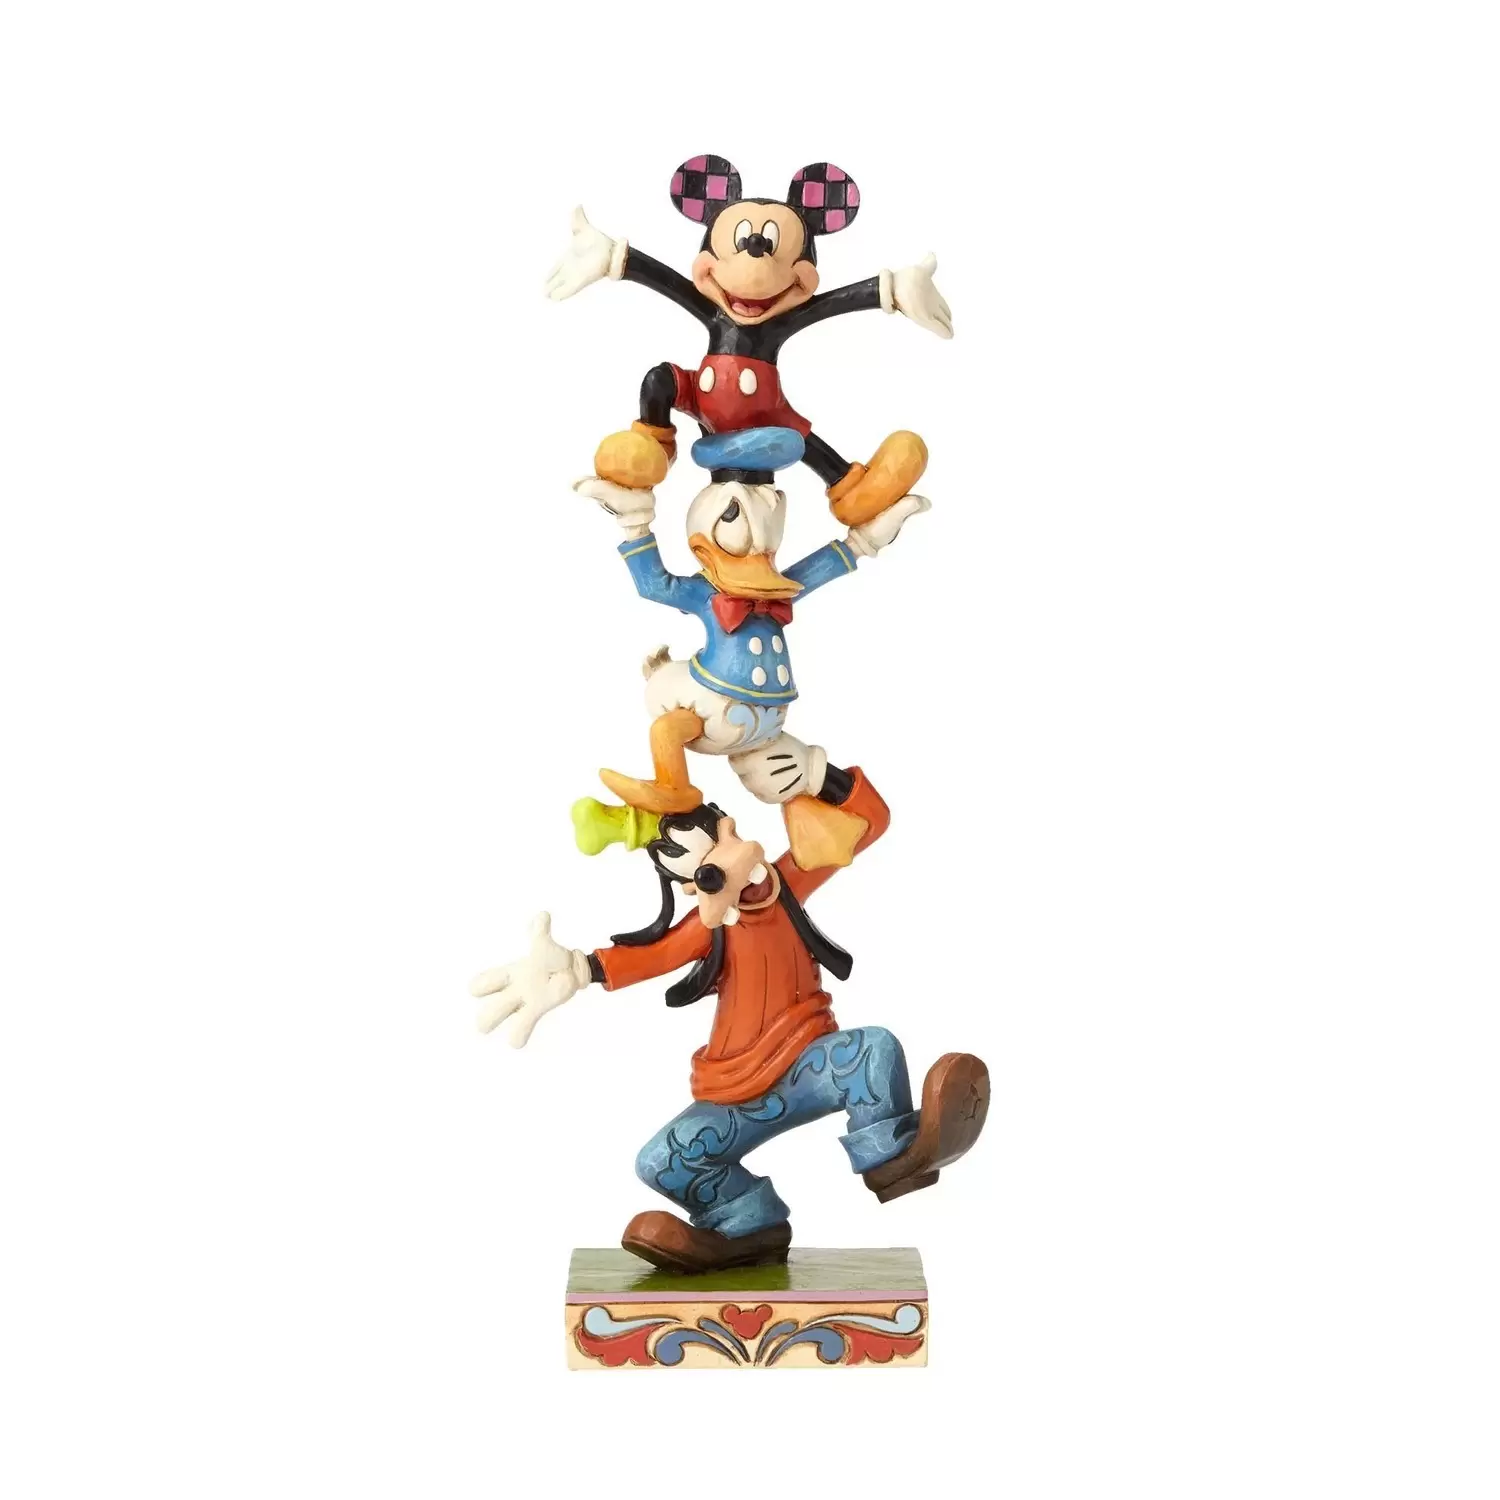 Disney Traditions by Jim Shore - Teetering Tower - Goofy, Donald, and Mickey